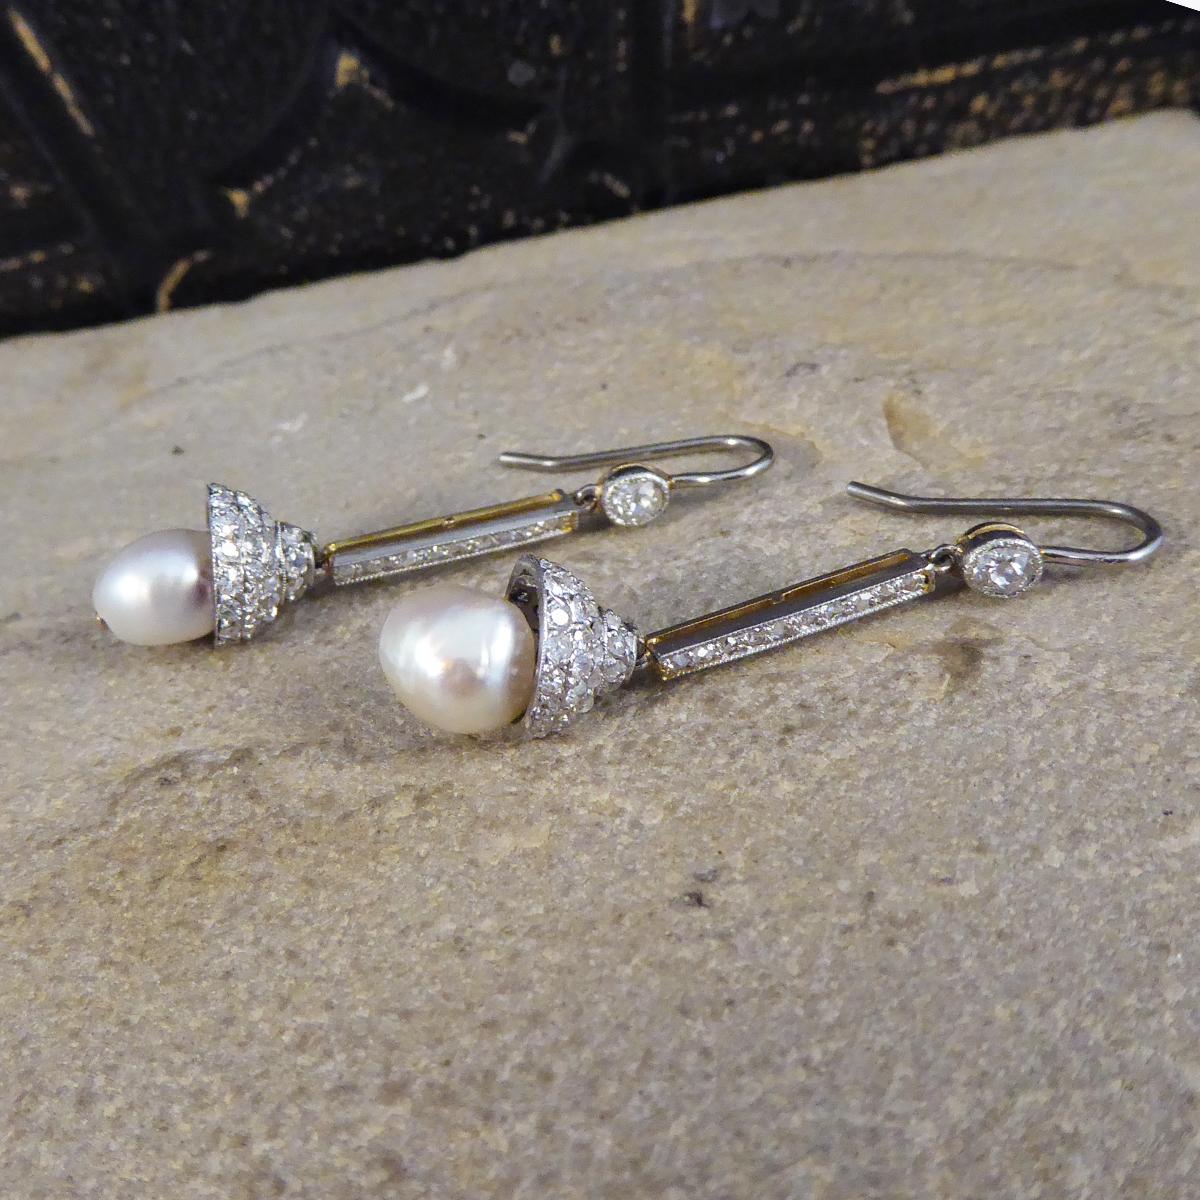 Absolutely perfect quality hand crafted Edwardian drop earrings. These earrings feature a single Natural Saltwater Pearl in each drop earring with very good lustre and GCS certificates for the Natural Pearls. There are old cut, rose cut and round